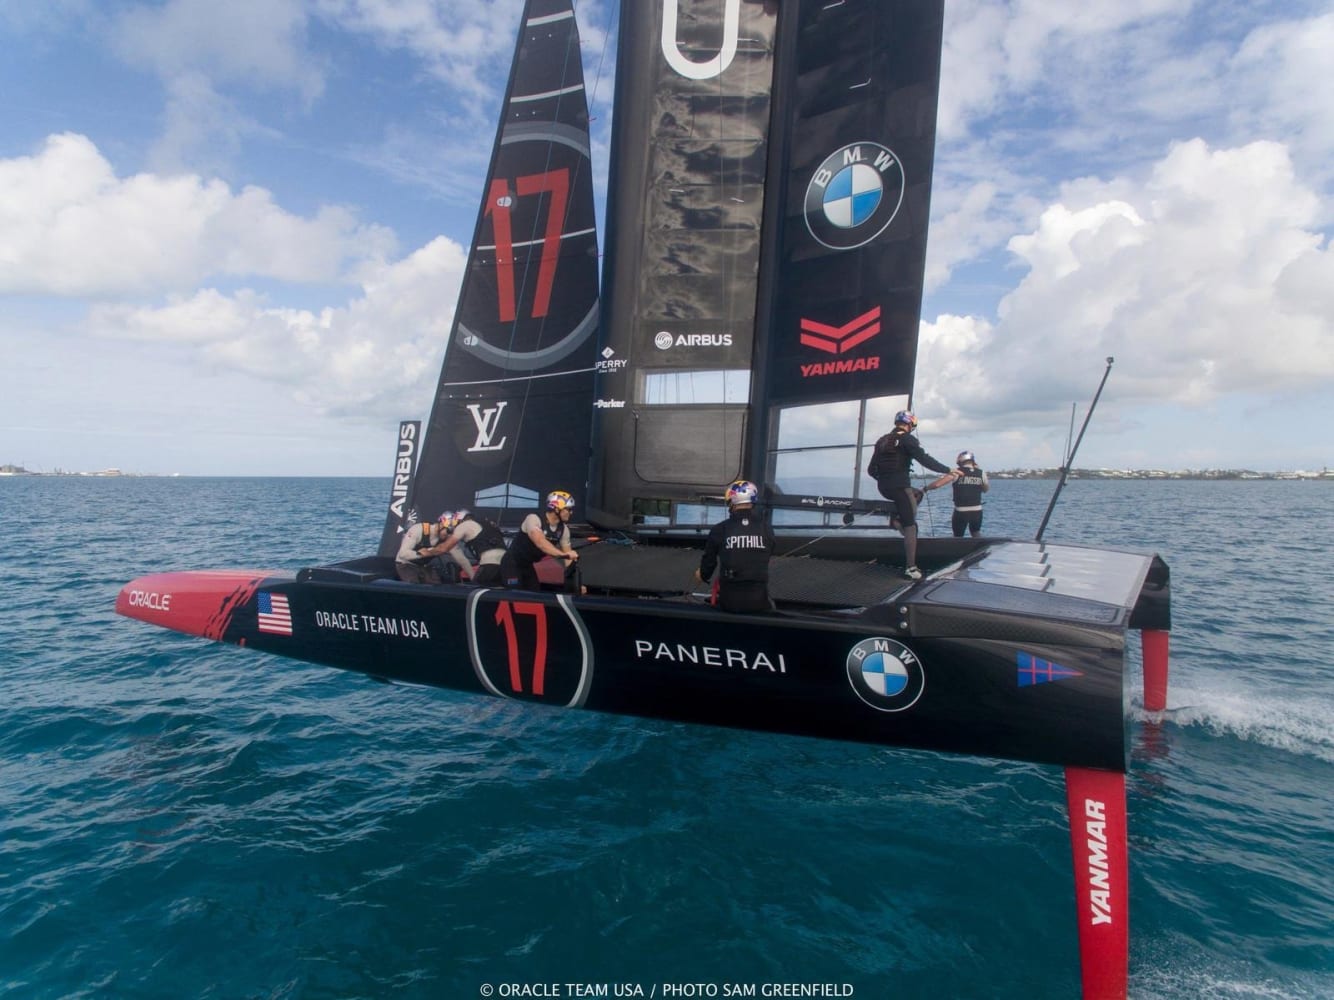 The America's Cup watches ruling the waves in 2017